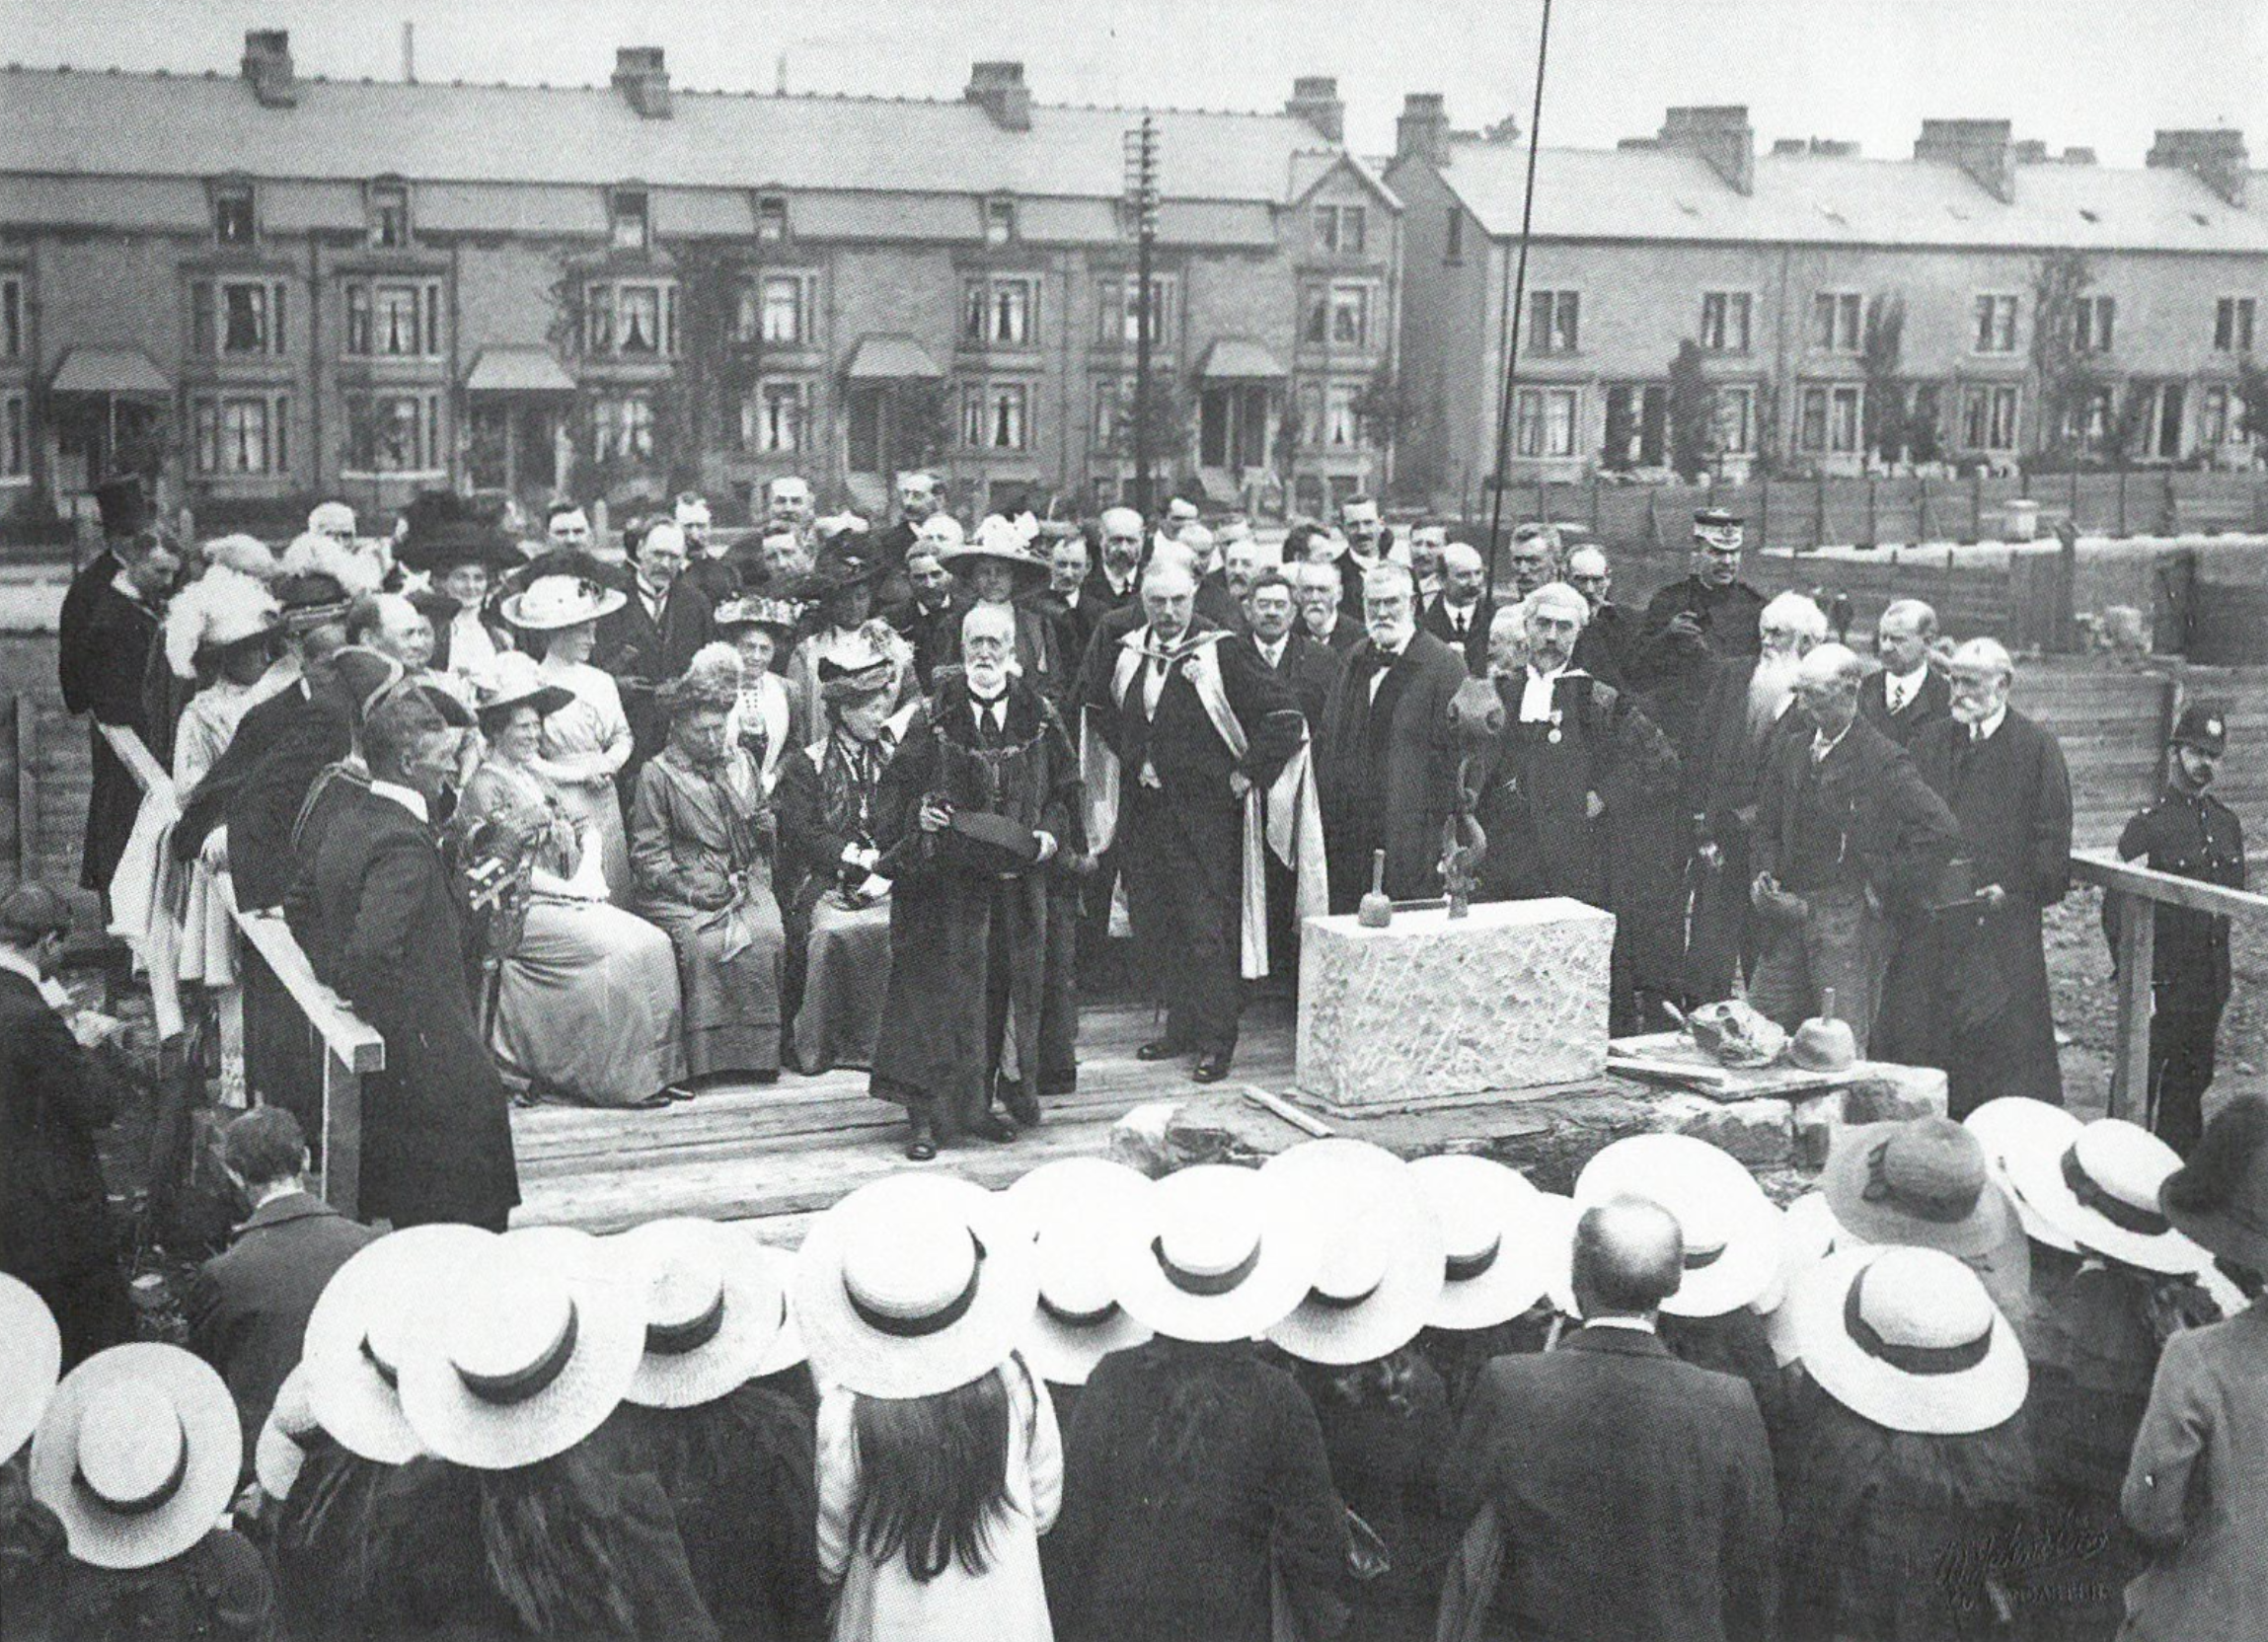 Laying the Foundation Stone 27th June 1912